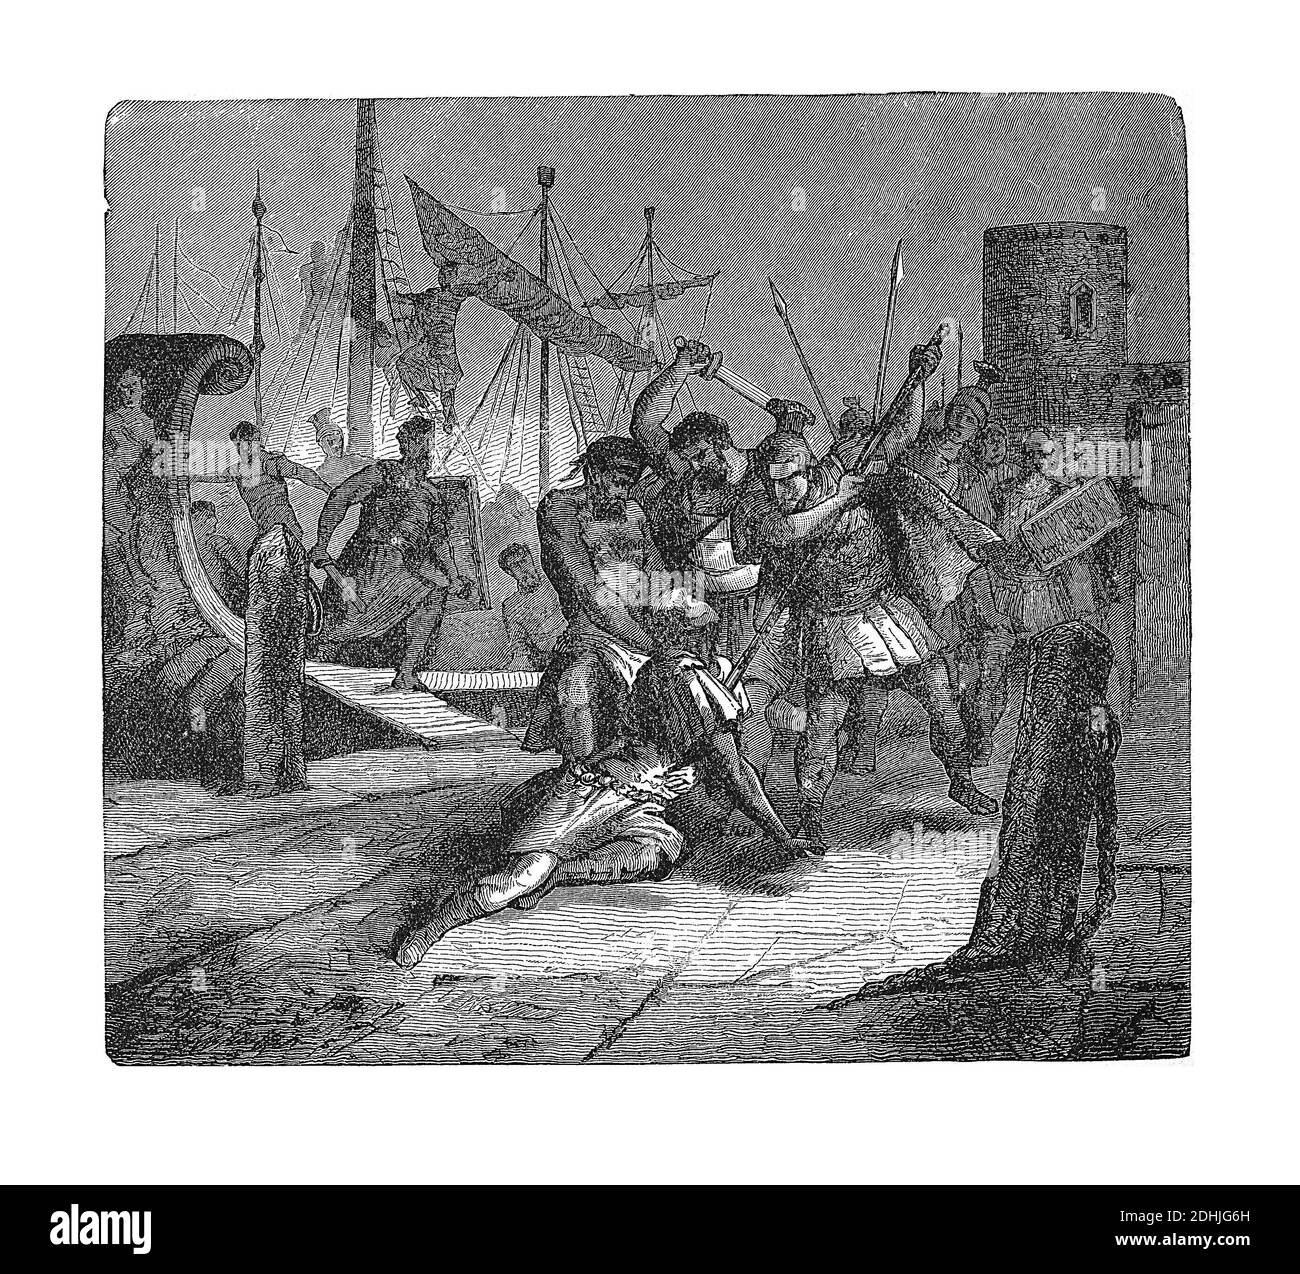 Original artwork of Cinna killed by own soldiers. Published in A pictorial history of the world's great nations: from the earliest dates to the presen Stock Photo